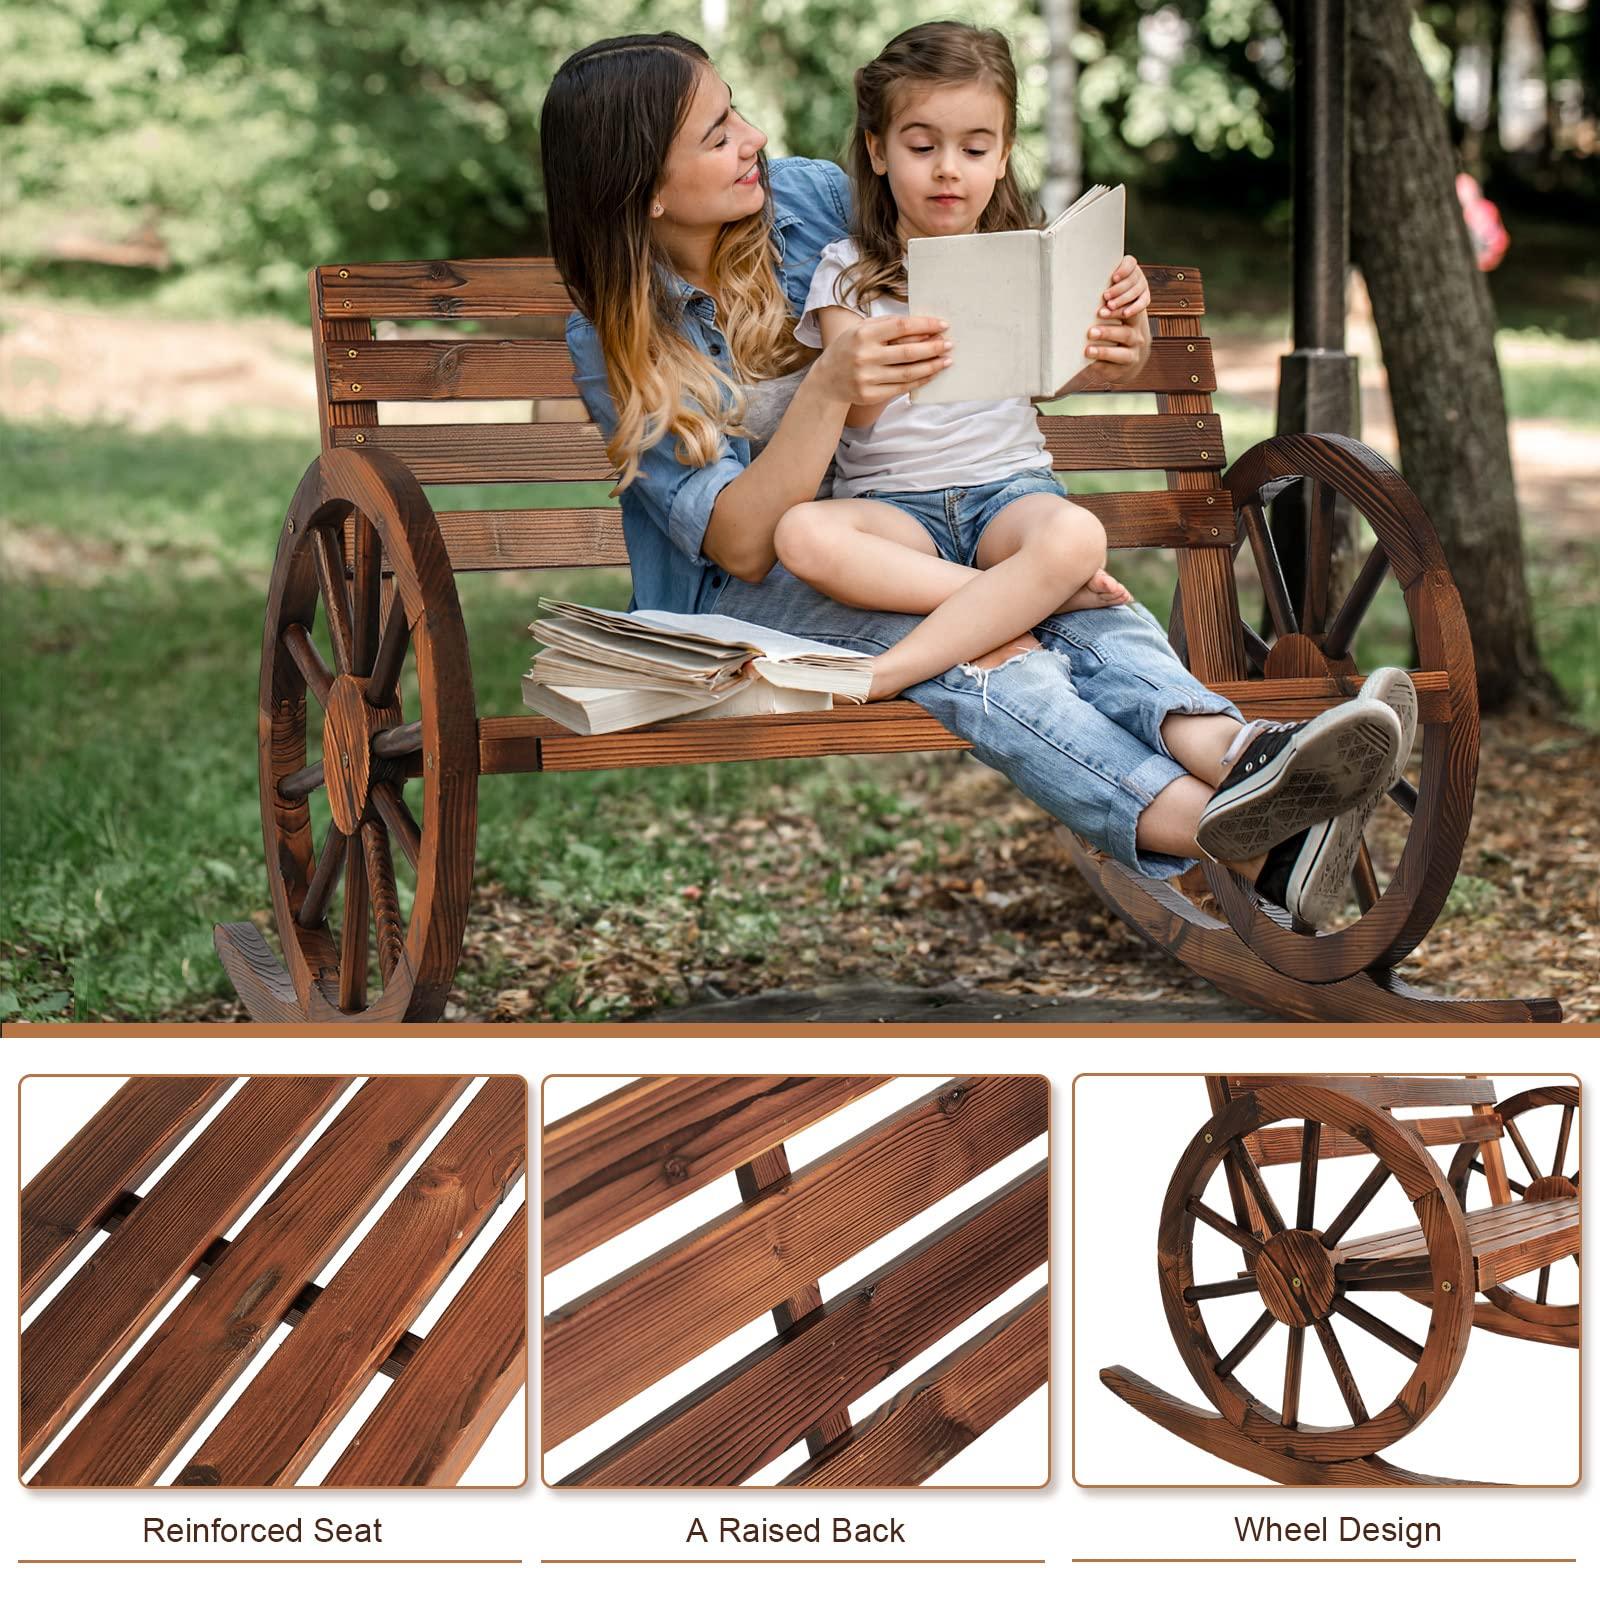 FURNDOOR Outdoor Wood Rocking Chair Wagon - Double Wooden Porch Rocking Bench Rustic Porch Rocker Chair for 2 Persons - CookCave